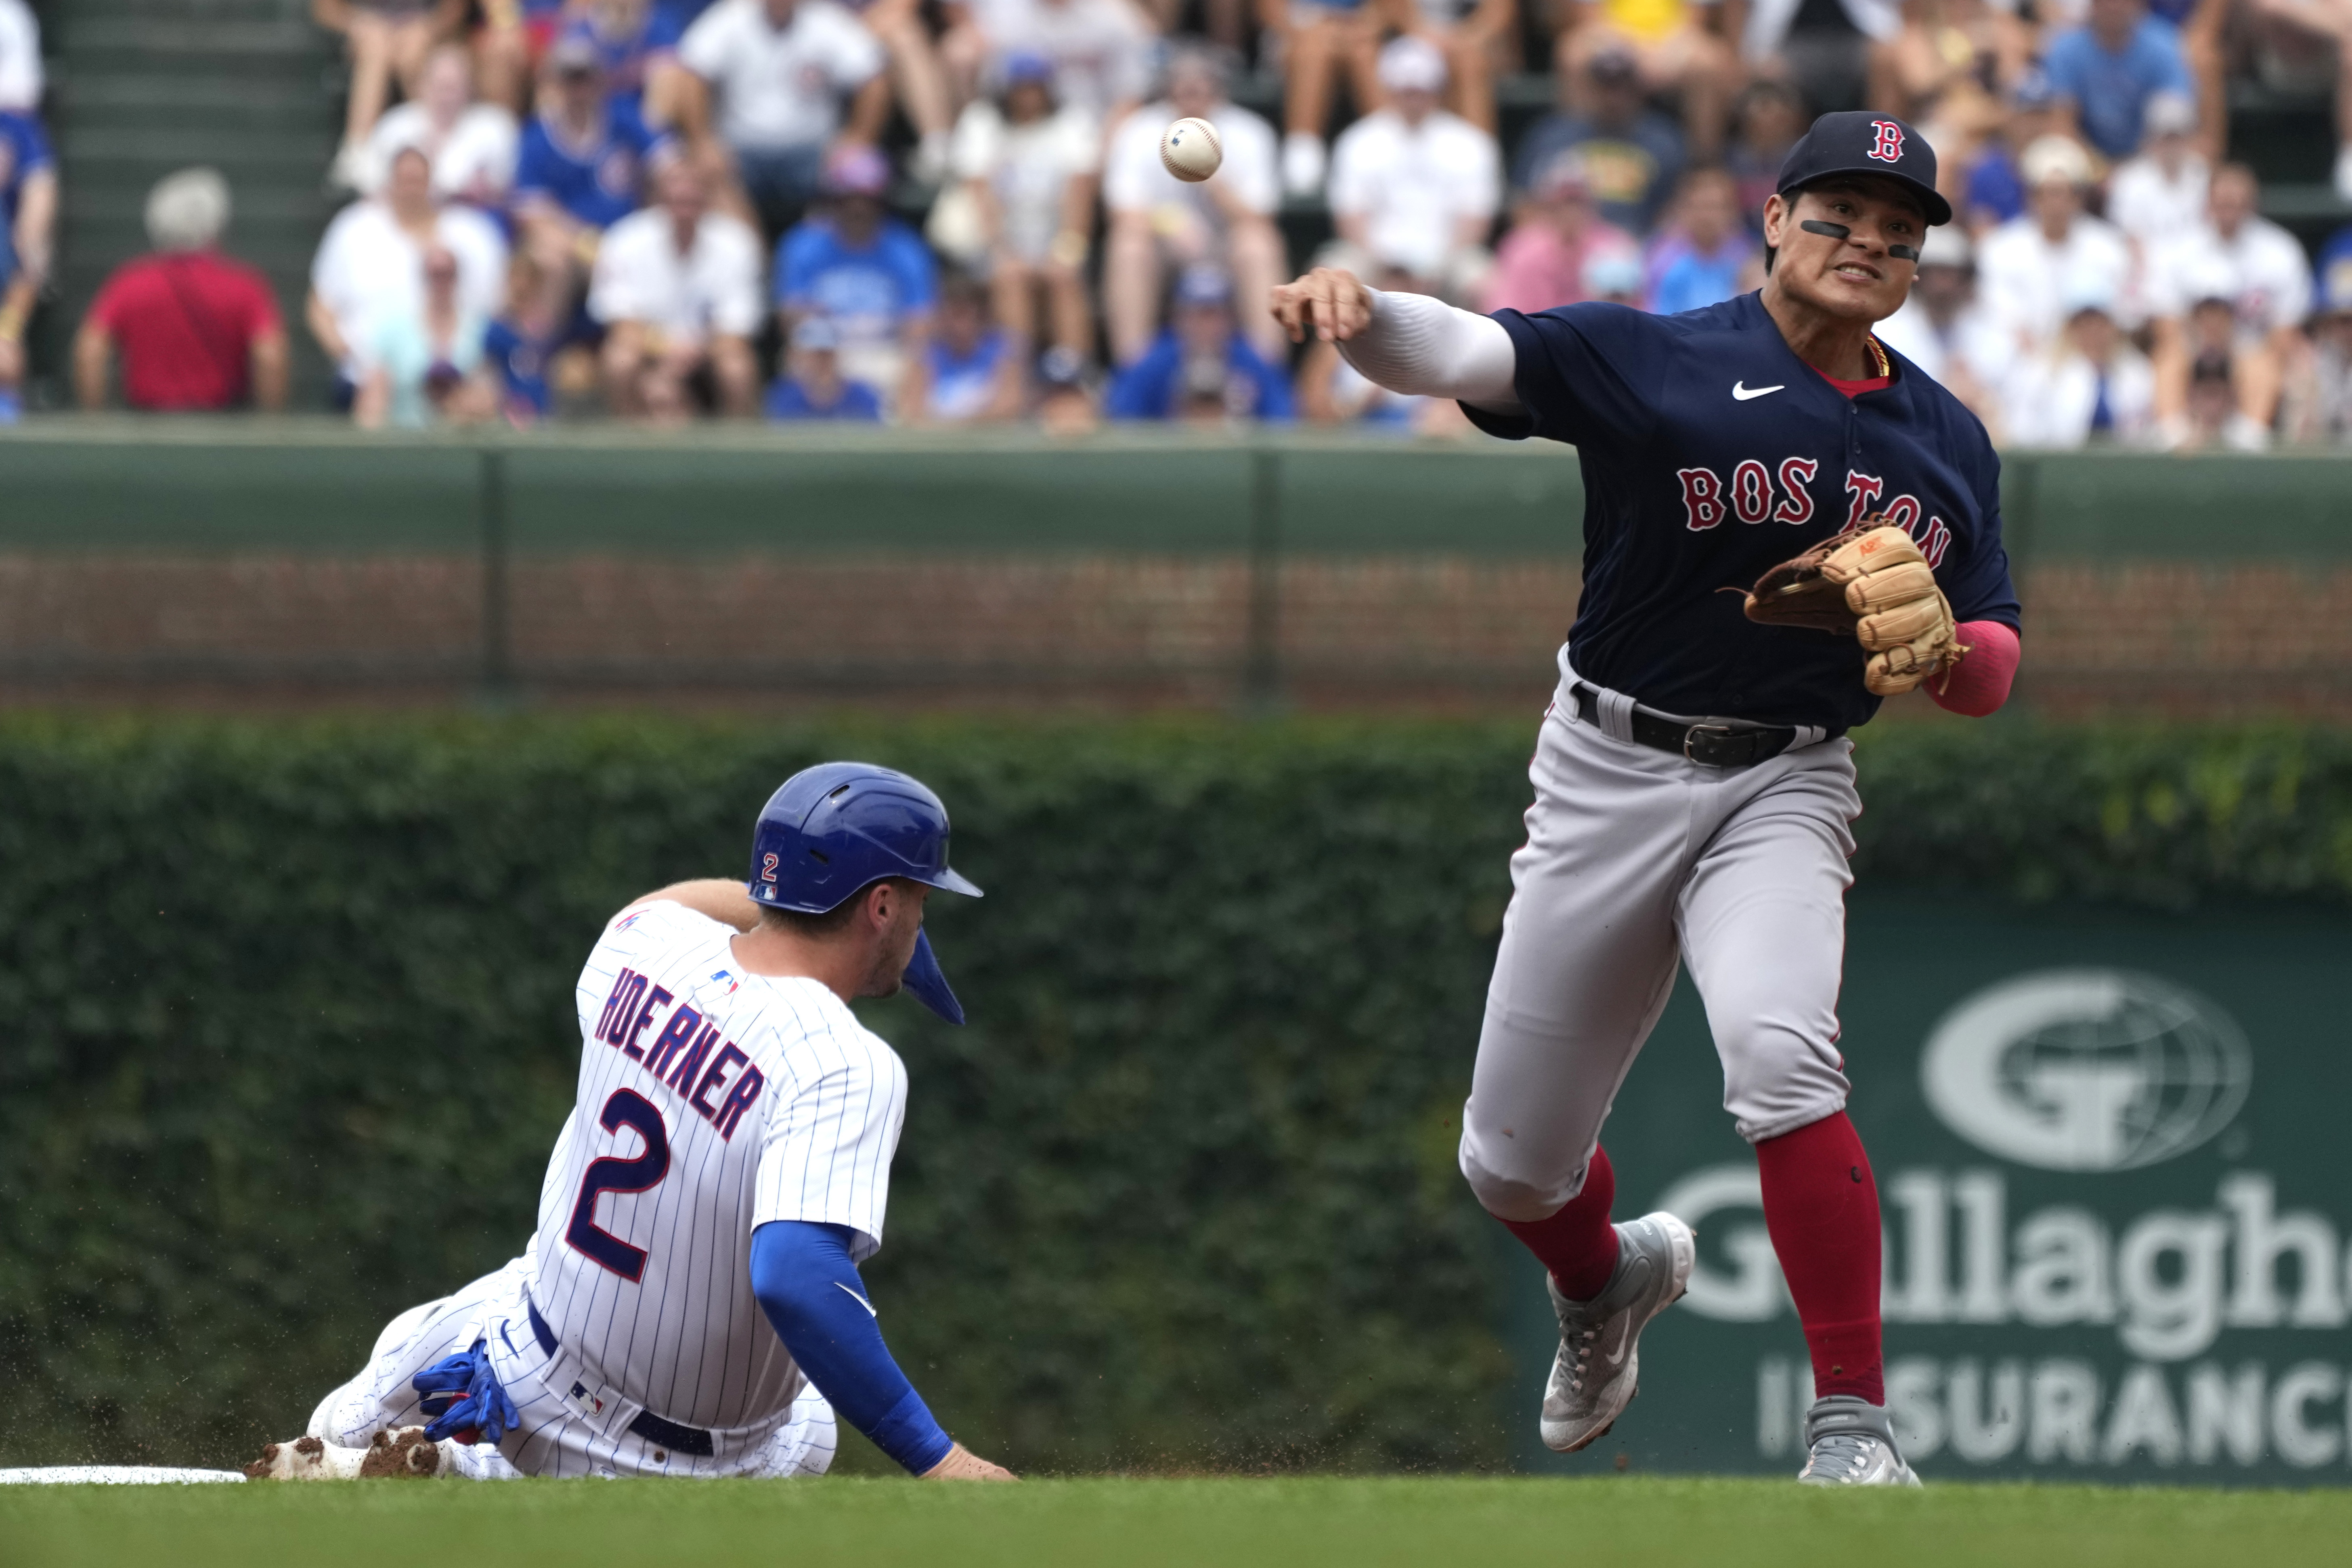 Five Cubs to start in All-Star Game - The Boston Globe